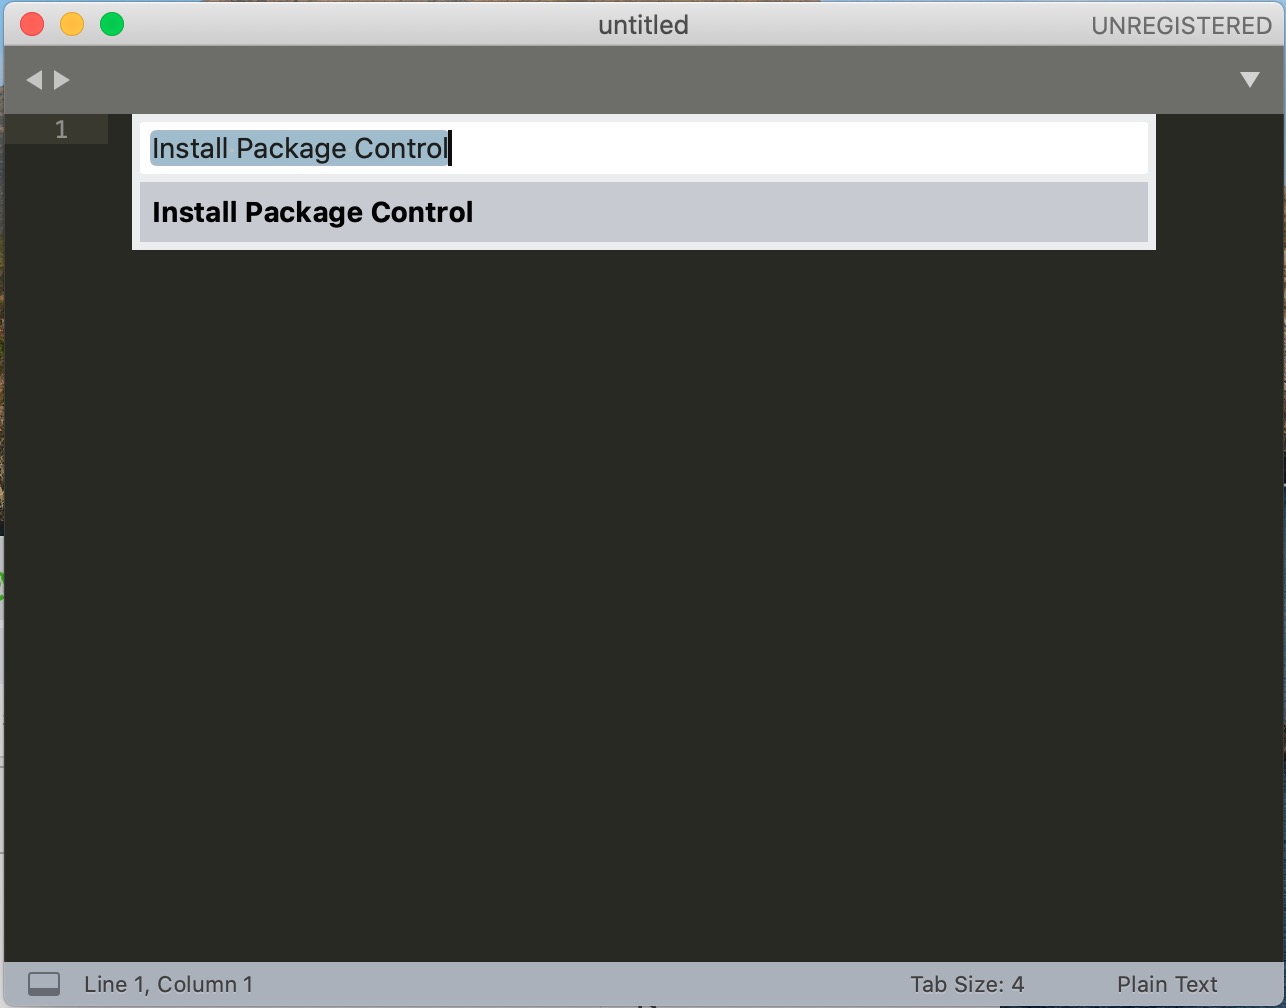 Install Package Control